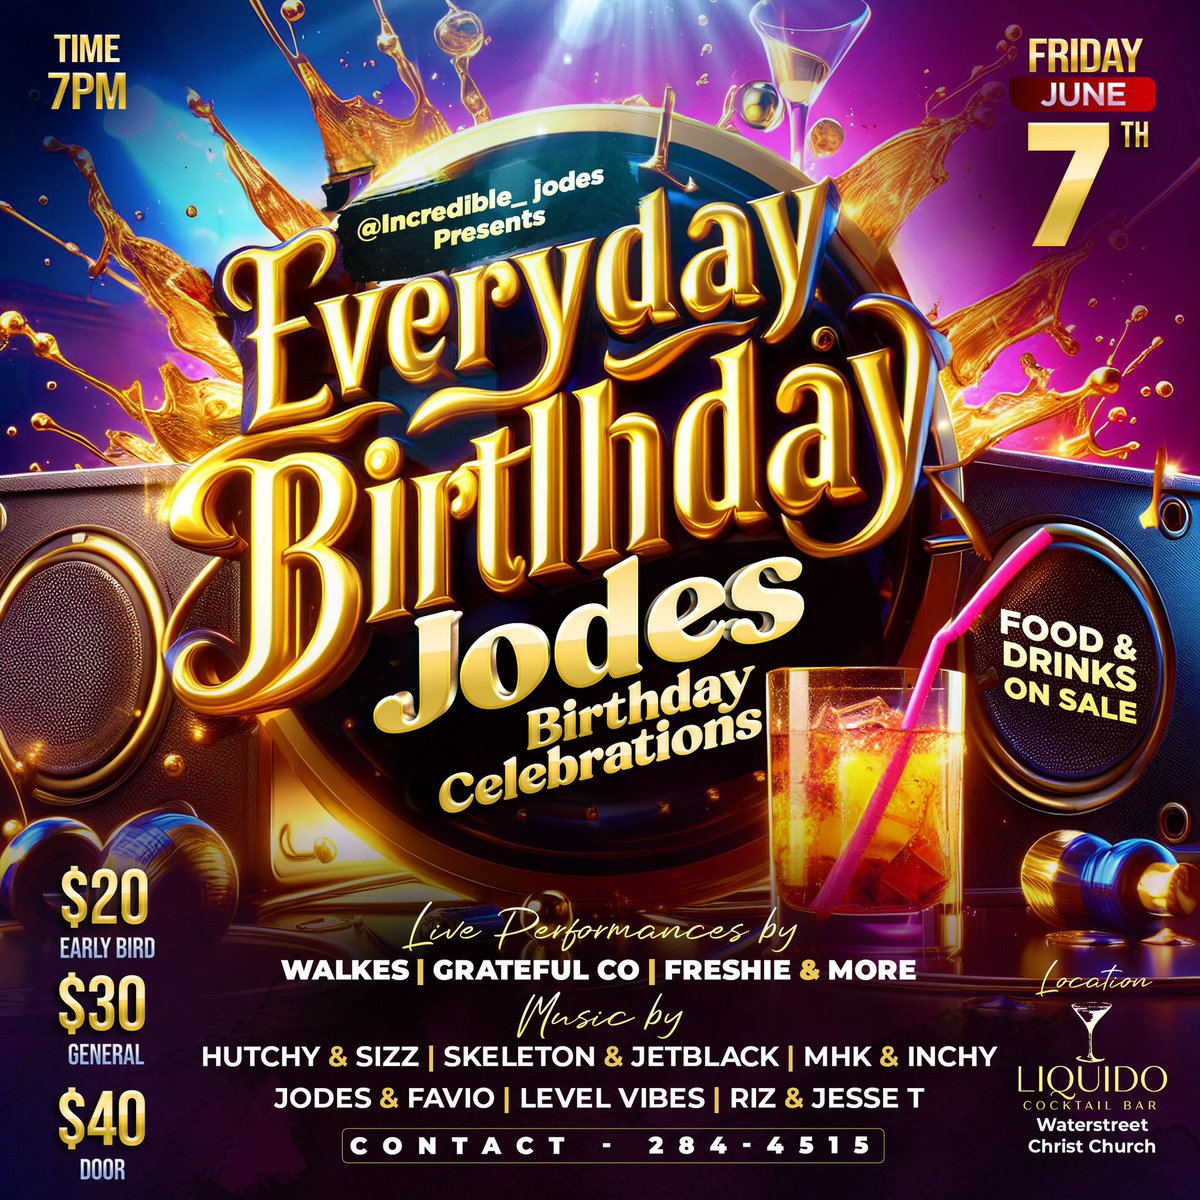 Living like everyday is my birthday cause everyday is my day! Everyday Birthday by Jodes we celebrating heavy June 7th just place it in your calendar ! ✨ 

Early Birds $20

Time: 7PM

Location : Liquido Bar 

Open Cocktail Bar 🍹

Ticket Hotline 📞: 284-4515

#OneLifeToLive